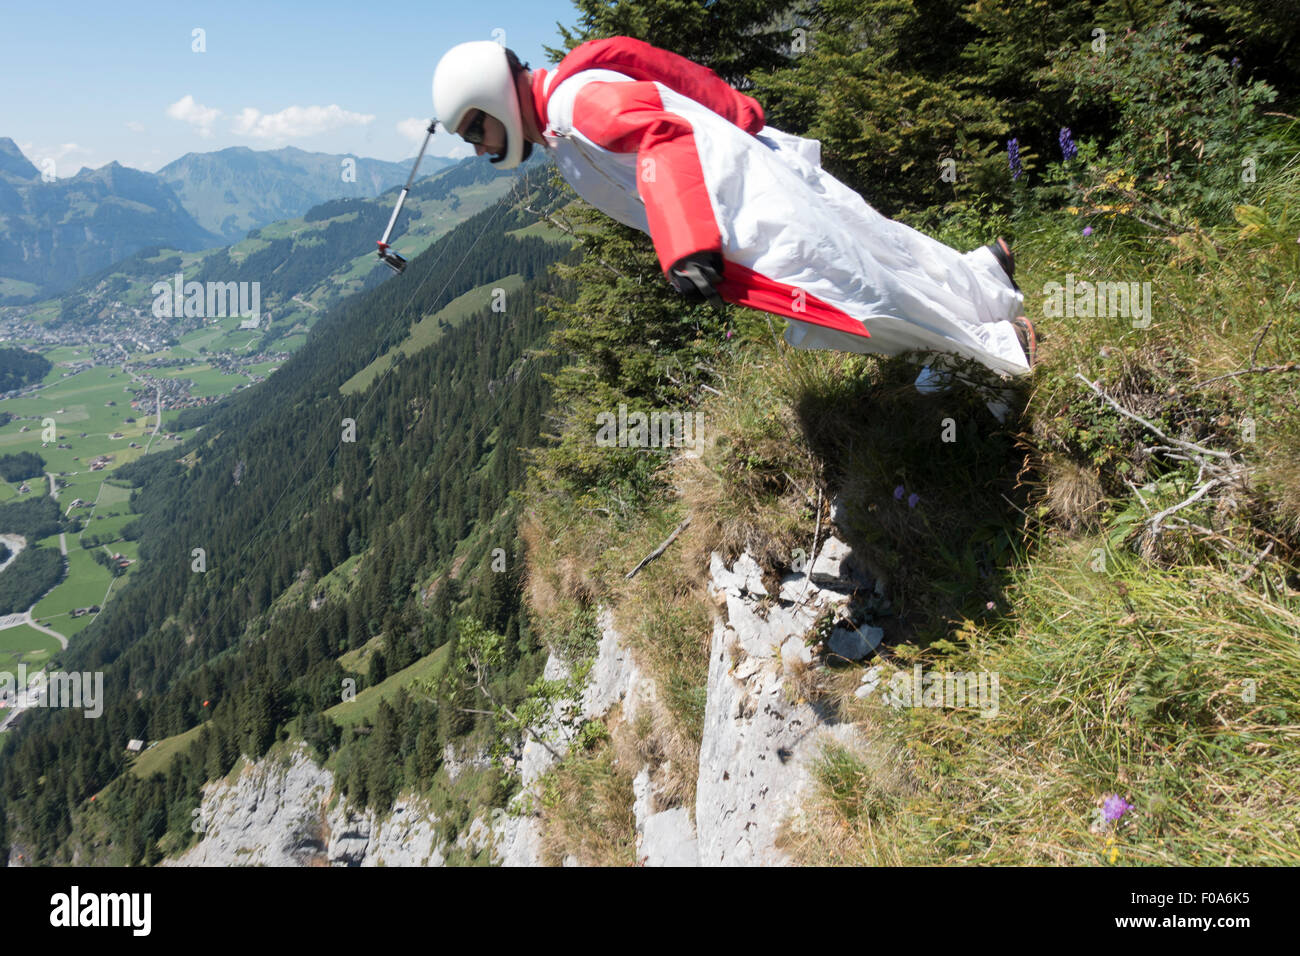 Wingsuit BASE jumper is exiting off a cliff downwards the valley and starts flying with his birdman suit. Stock Photo